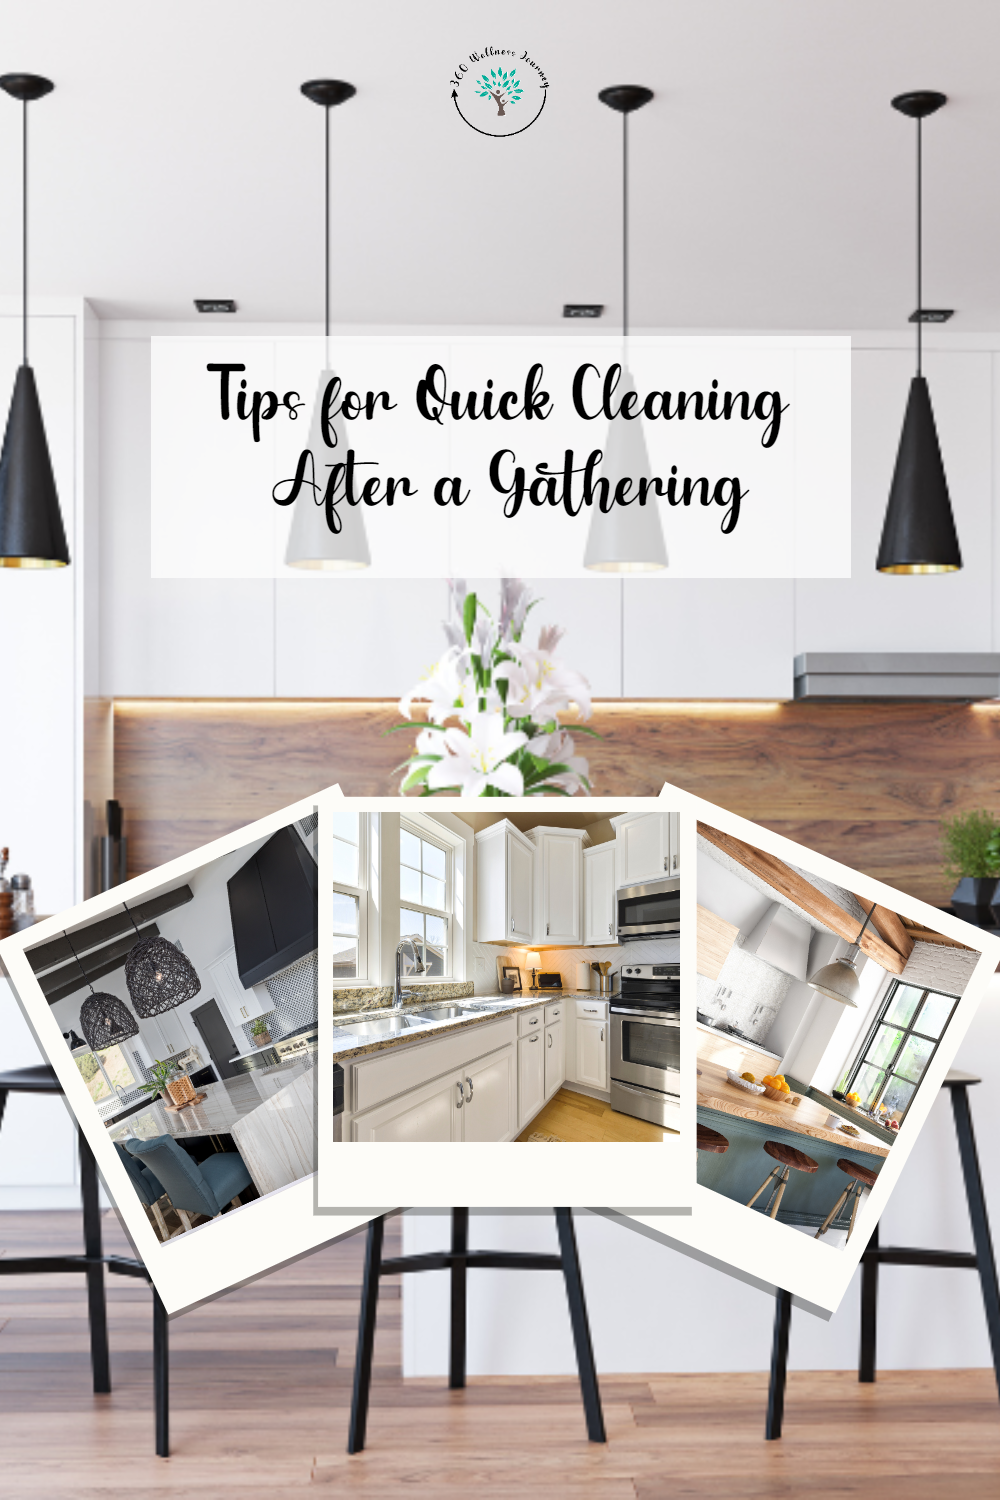 Tips for Quick Cleaning After a Gathering